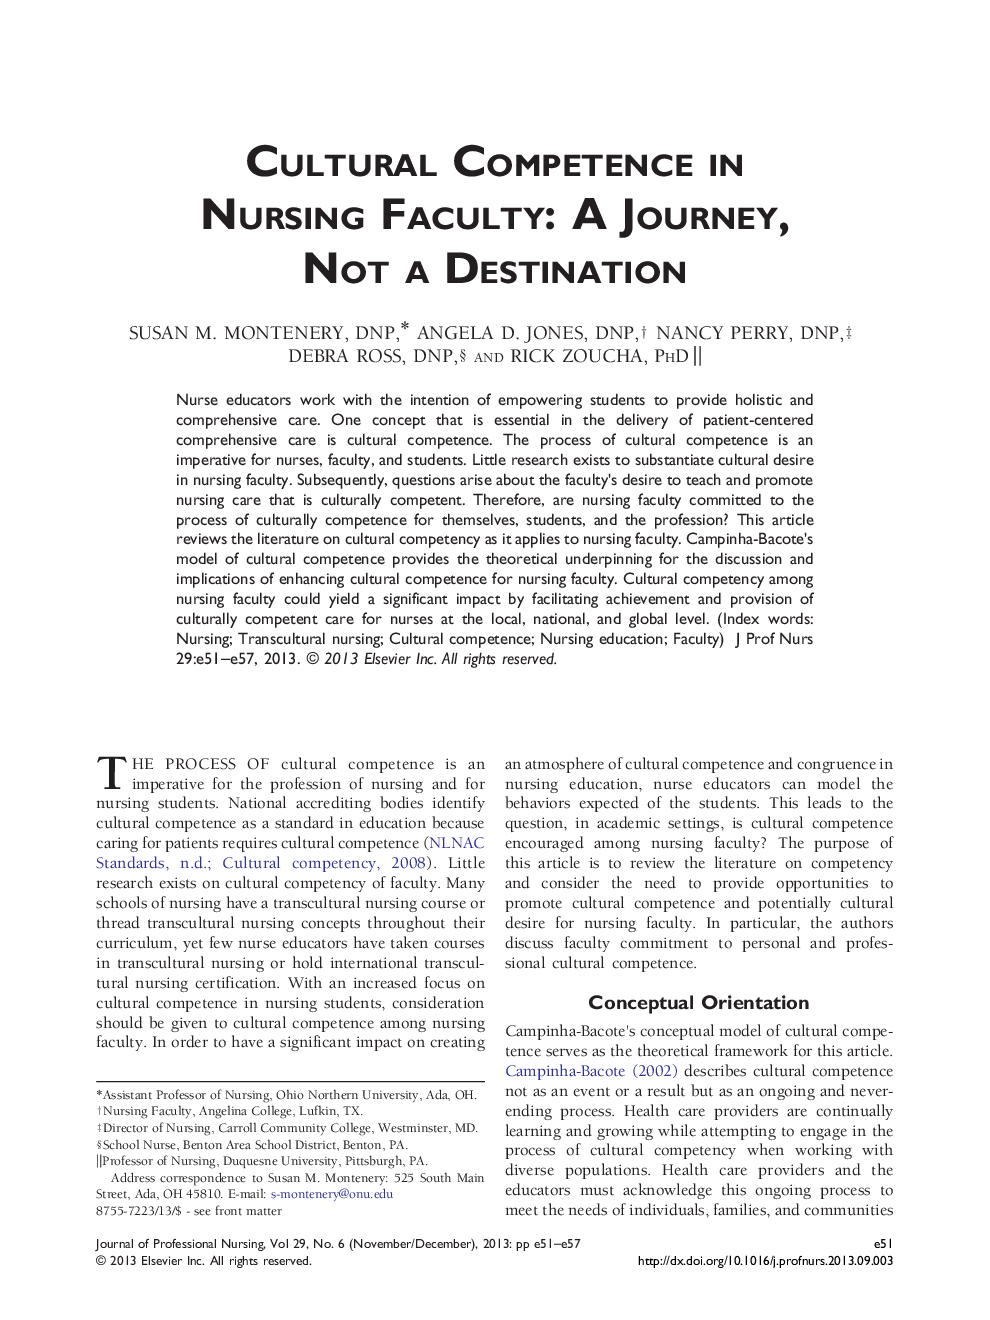 Cultural Competence in Nursing Faculty: A Journey, Not a Destination